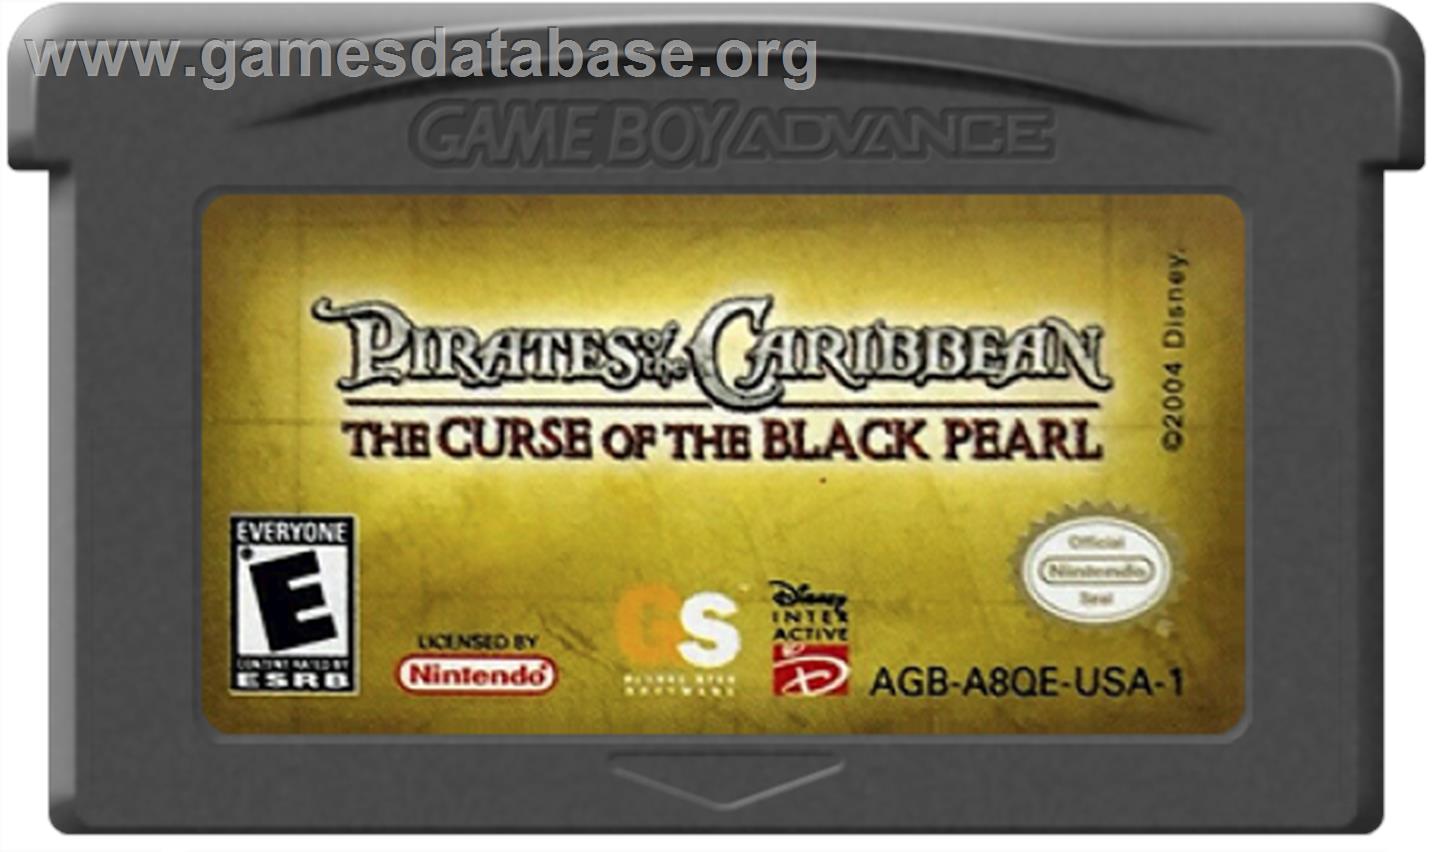 Pirates of the Caribbean: The Curse of the Black Pearl - Nintendo Game Boy Advance - Artwork - Cartridge